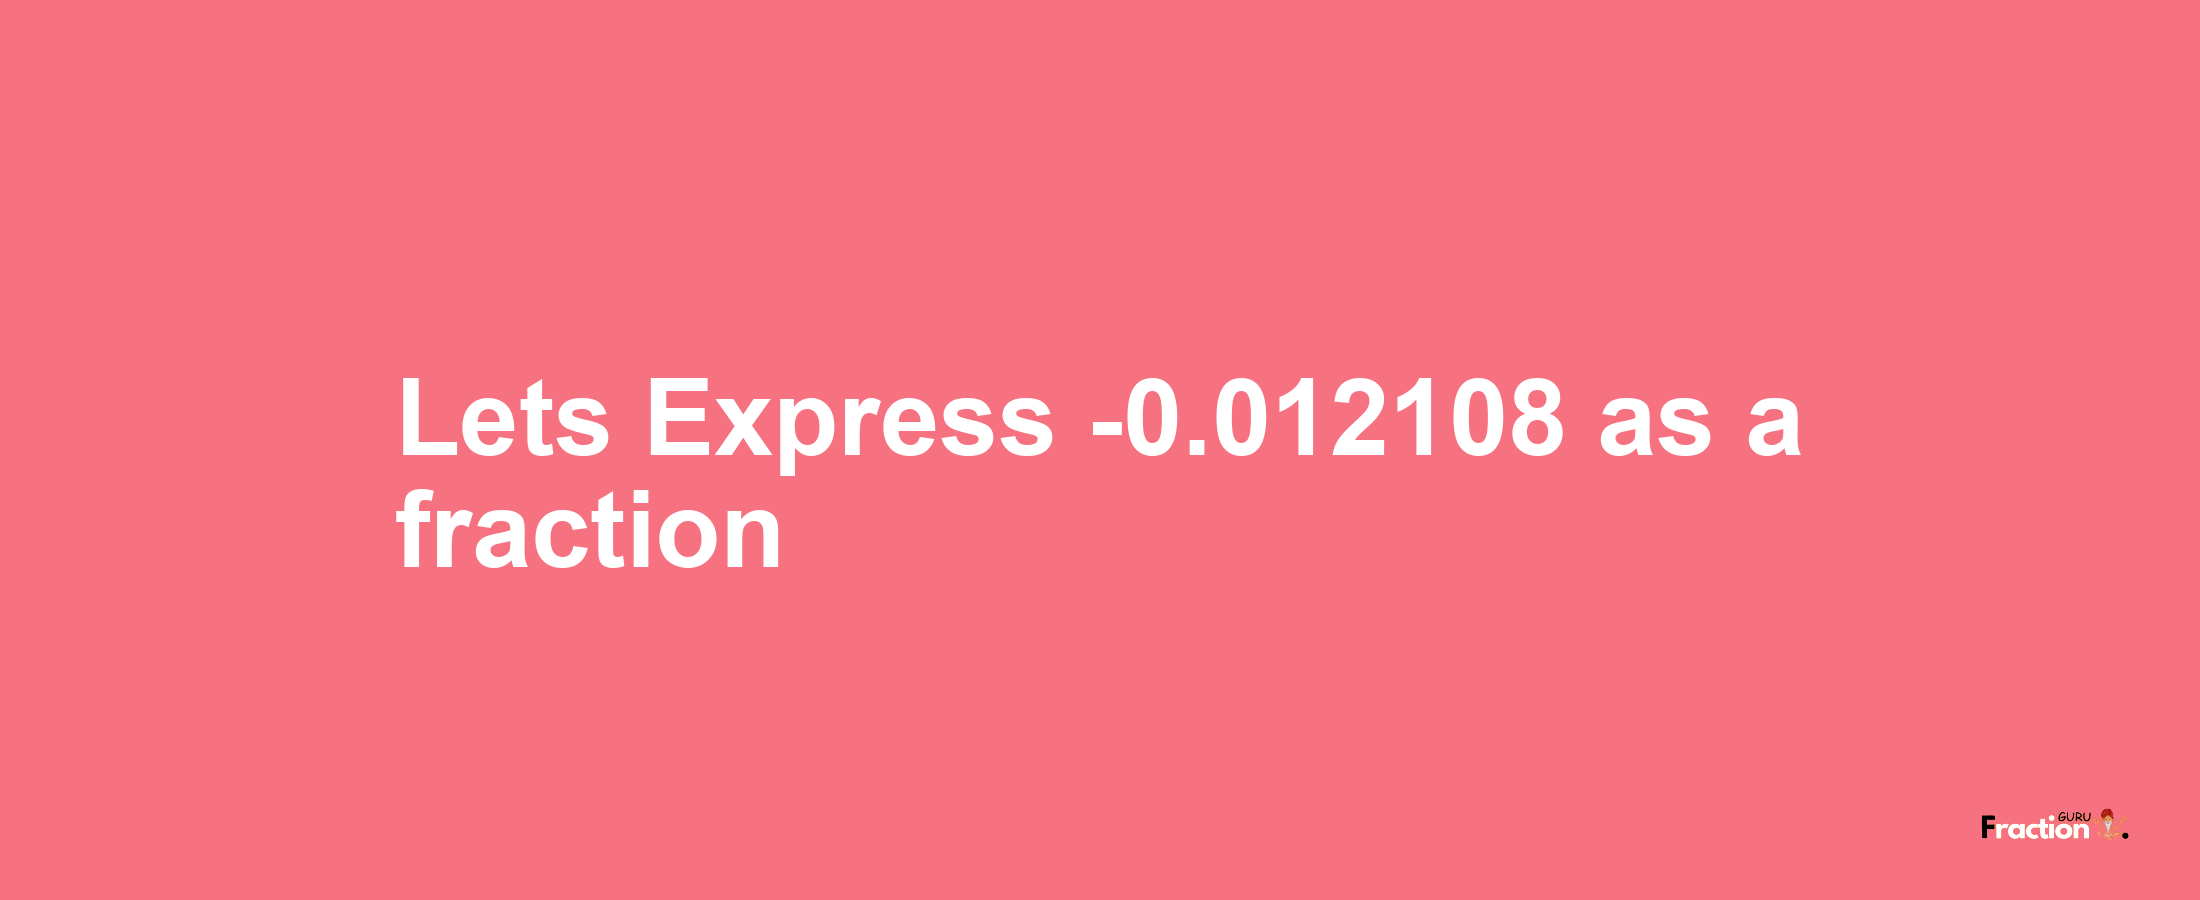 Lets Express -0.012108 as afraction